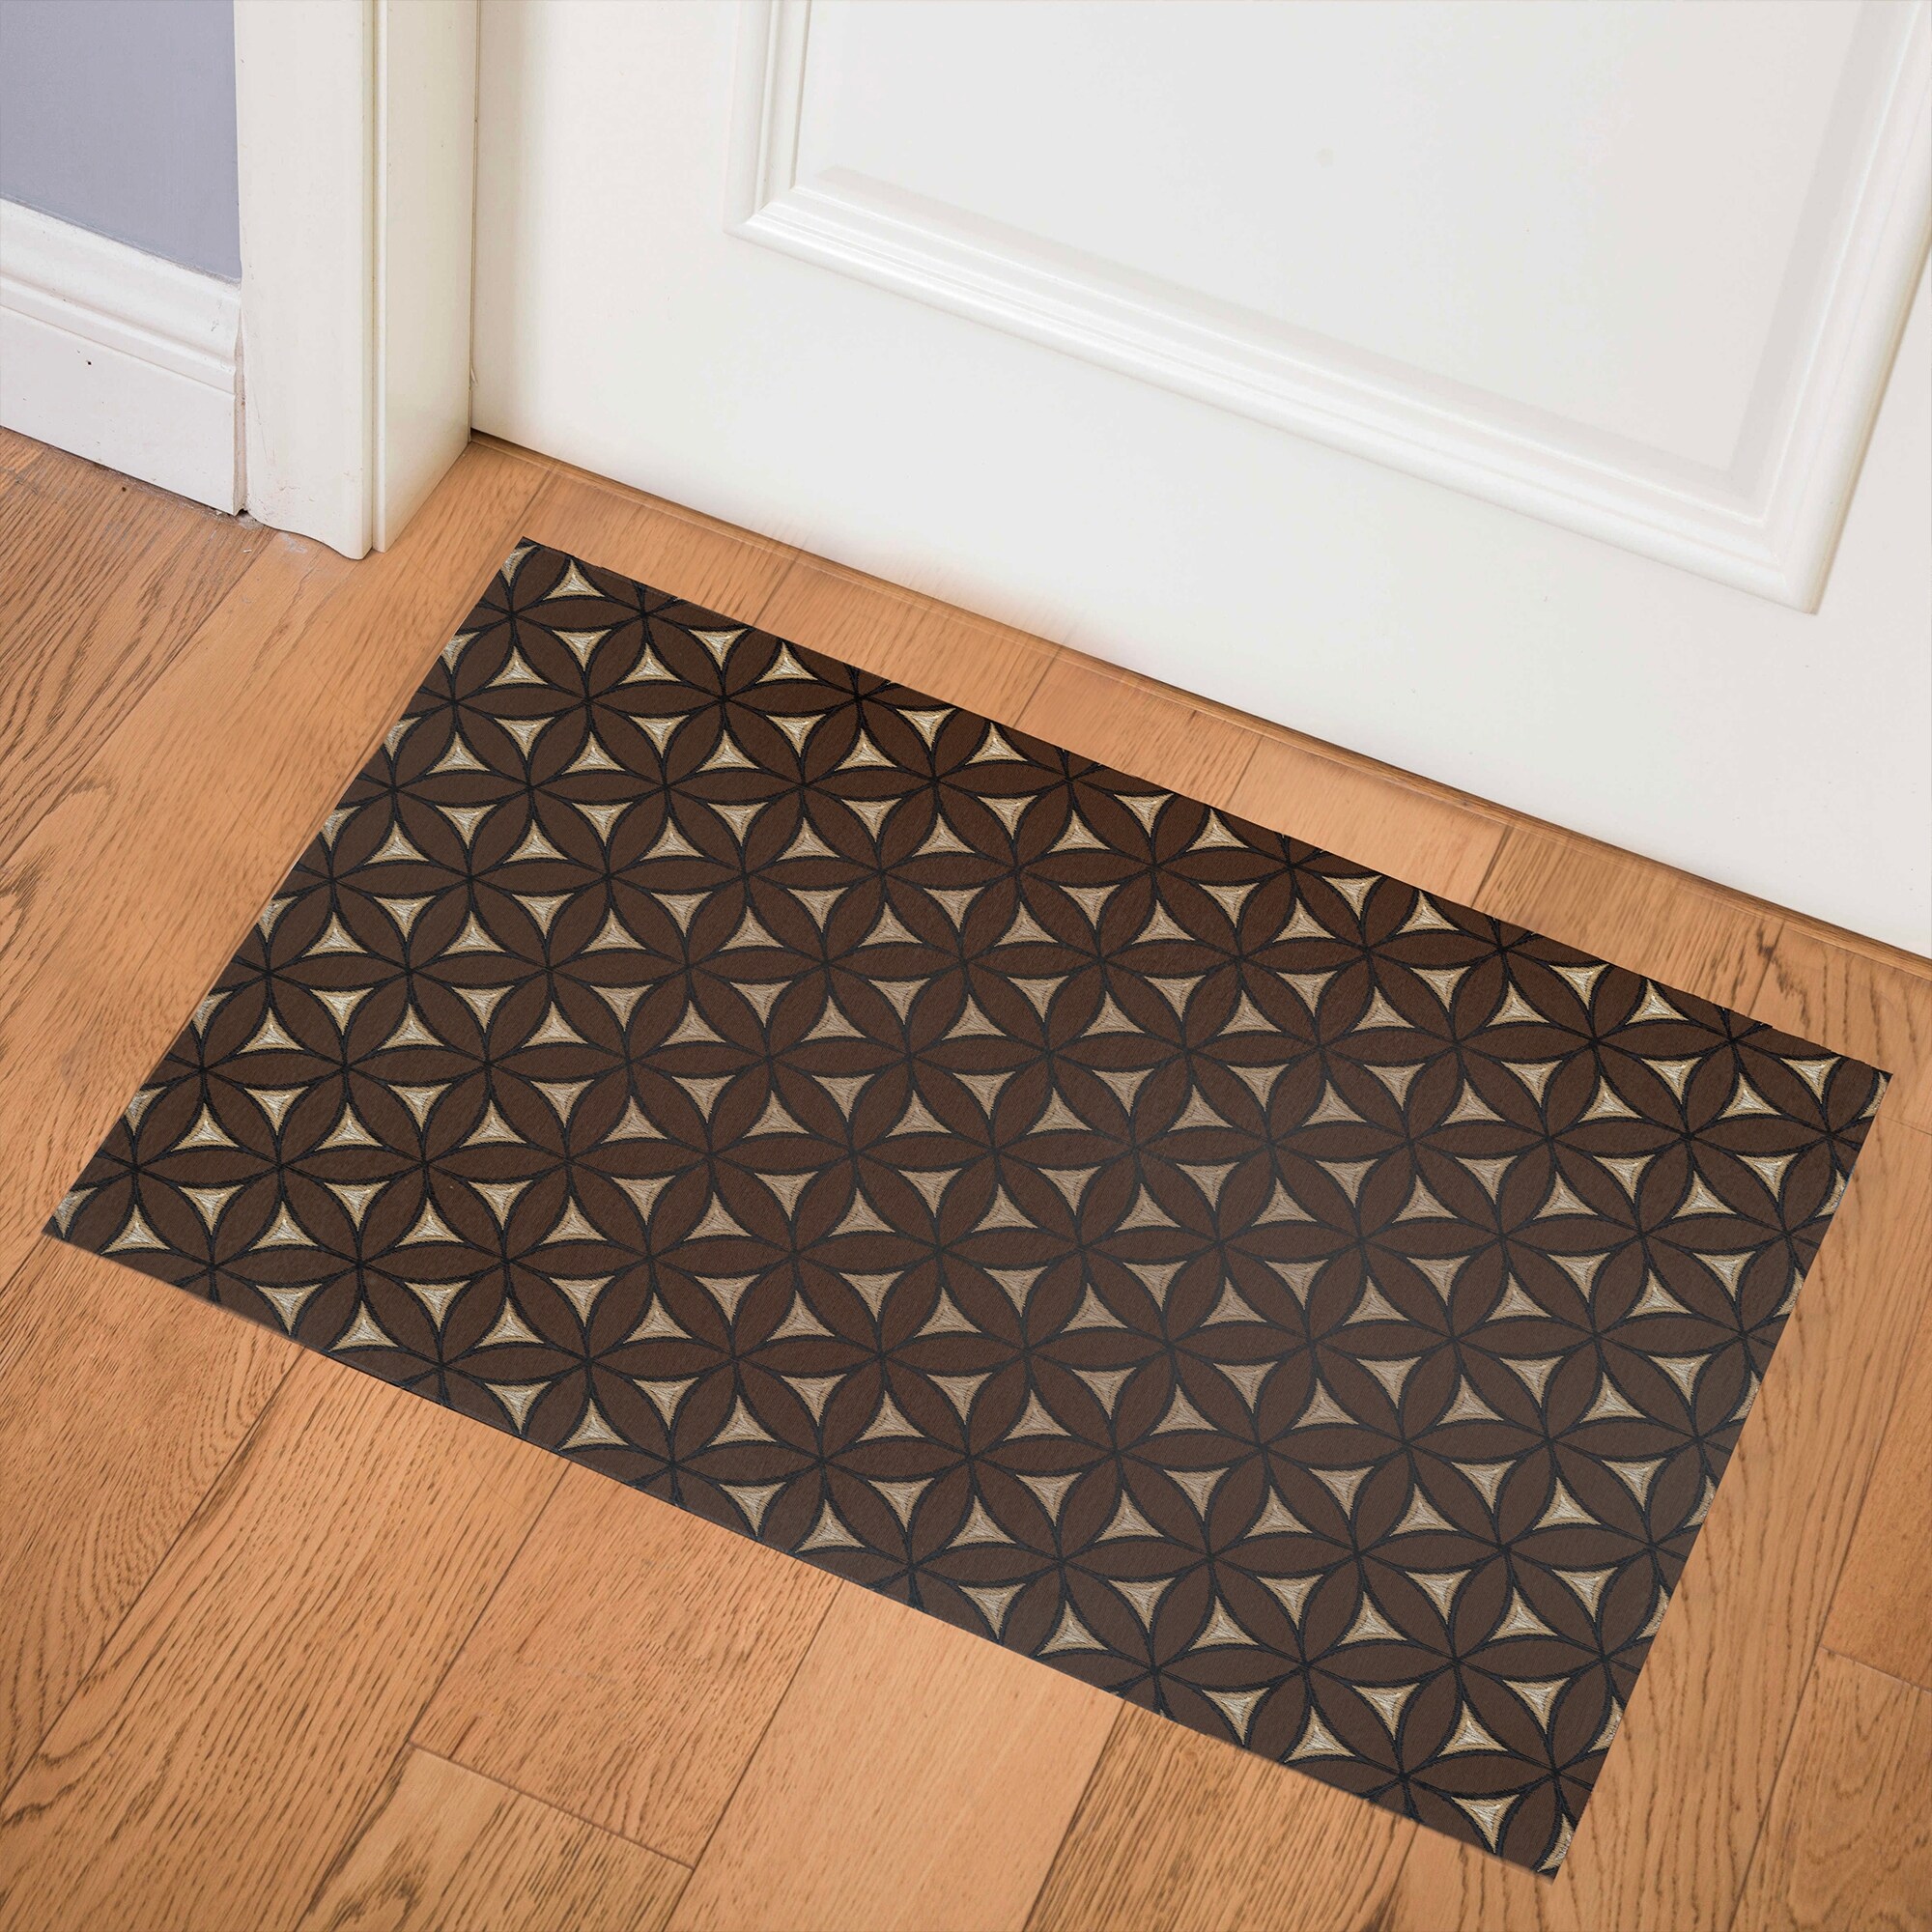 https://ak1.ostkcdn.com/images/products/is/images/direct/0a8008276079806382b6bf8e4e08cedc54cb2309/HUNTINGTON-BROWN-Indoor-Floor-Mat-By-Kavka-Designs.jpg